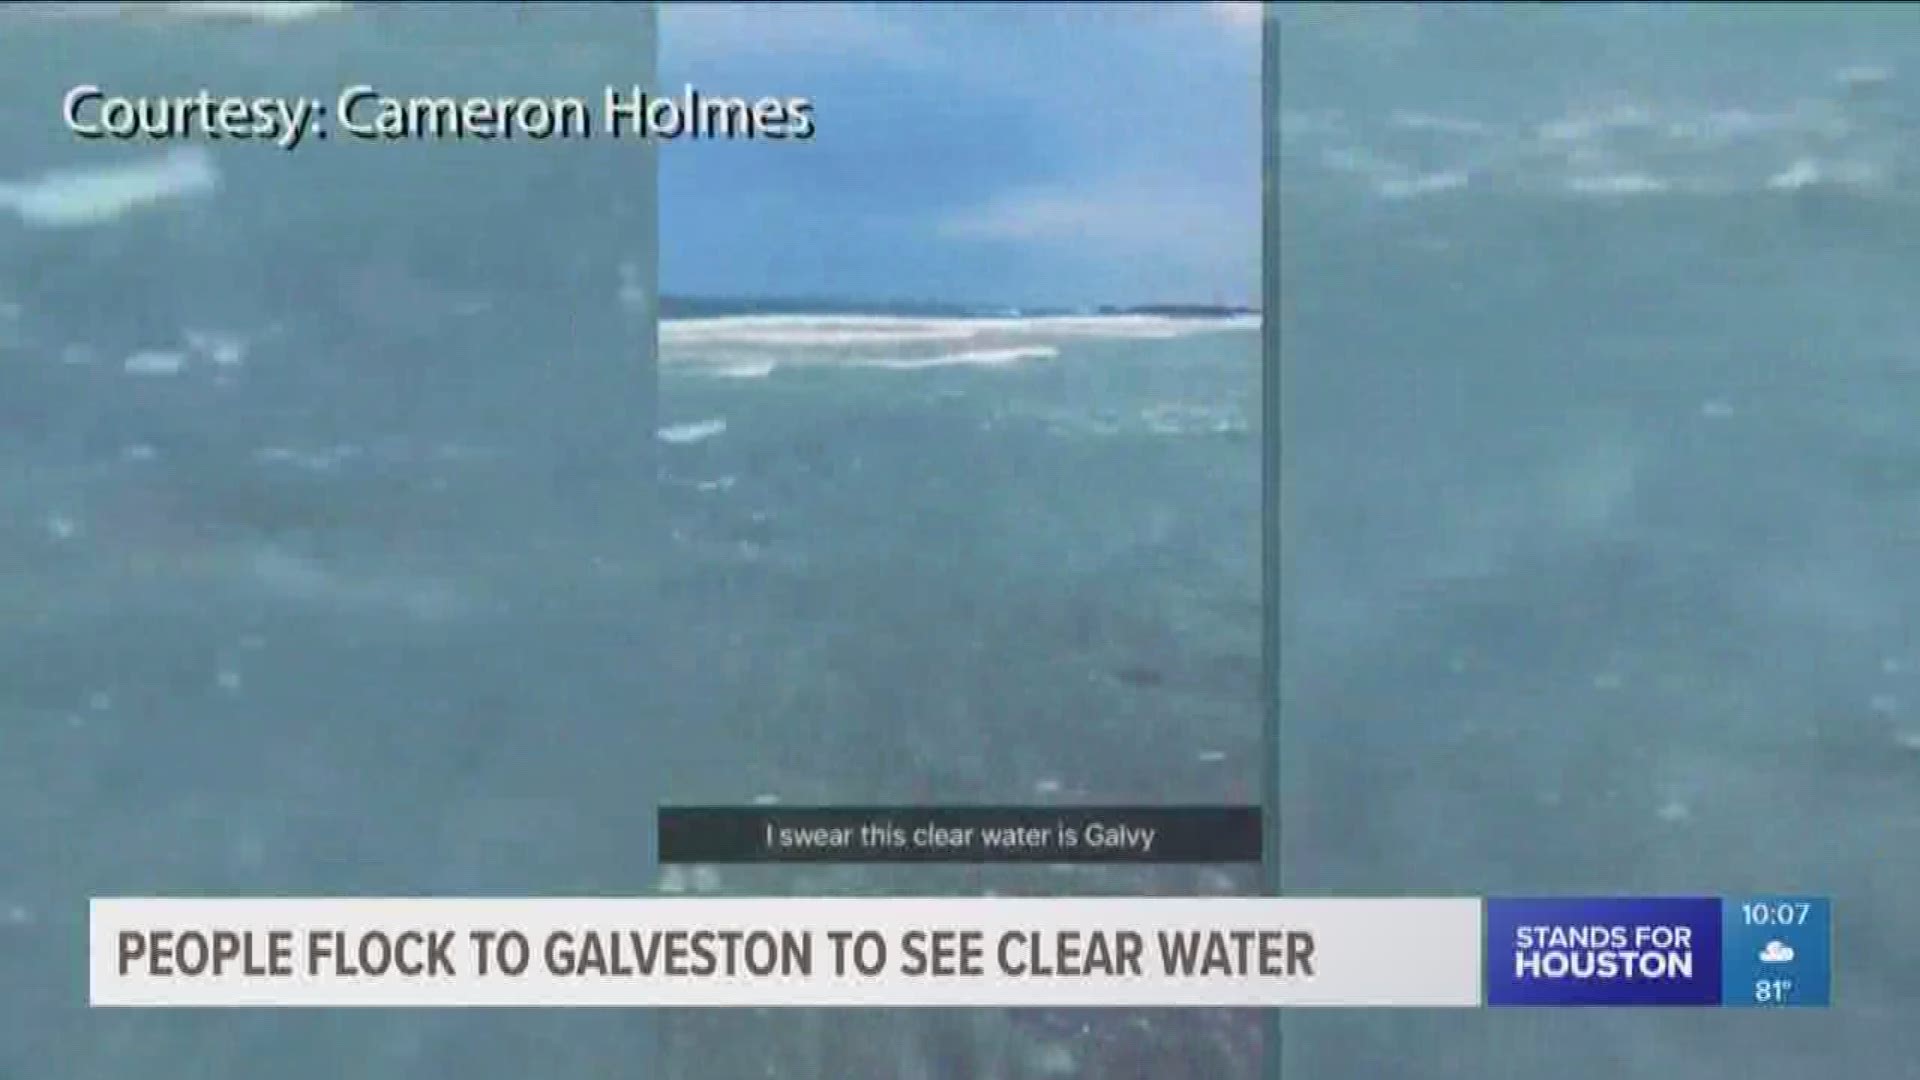 People crowded Galveston Island beaches to enjoy Memorial Day and a rare sight: clear water.Wave the yellow flag, Galveston.  Was there really clear water on beaches near San Luis Pass?  Cameron Holmes' video of it posted to Twitter got plenty of "You ly